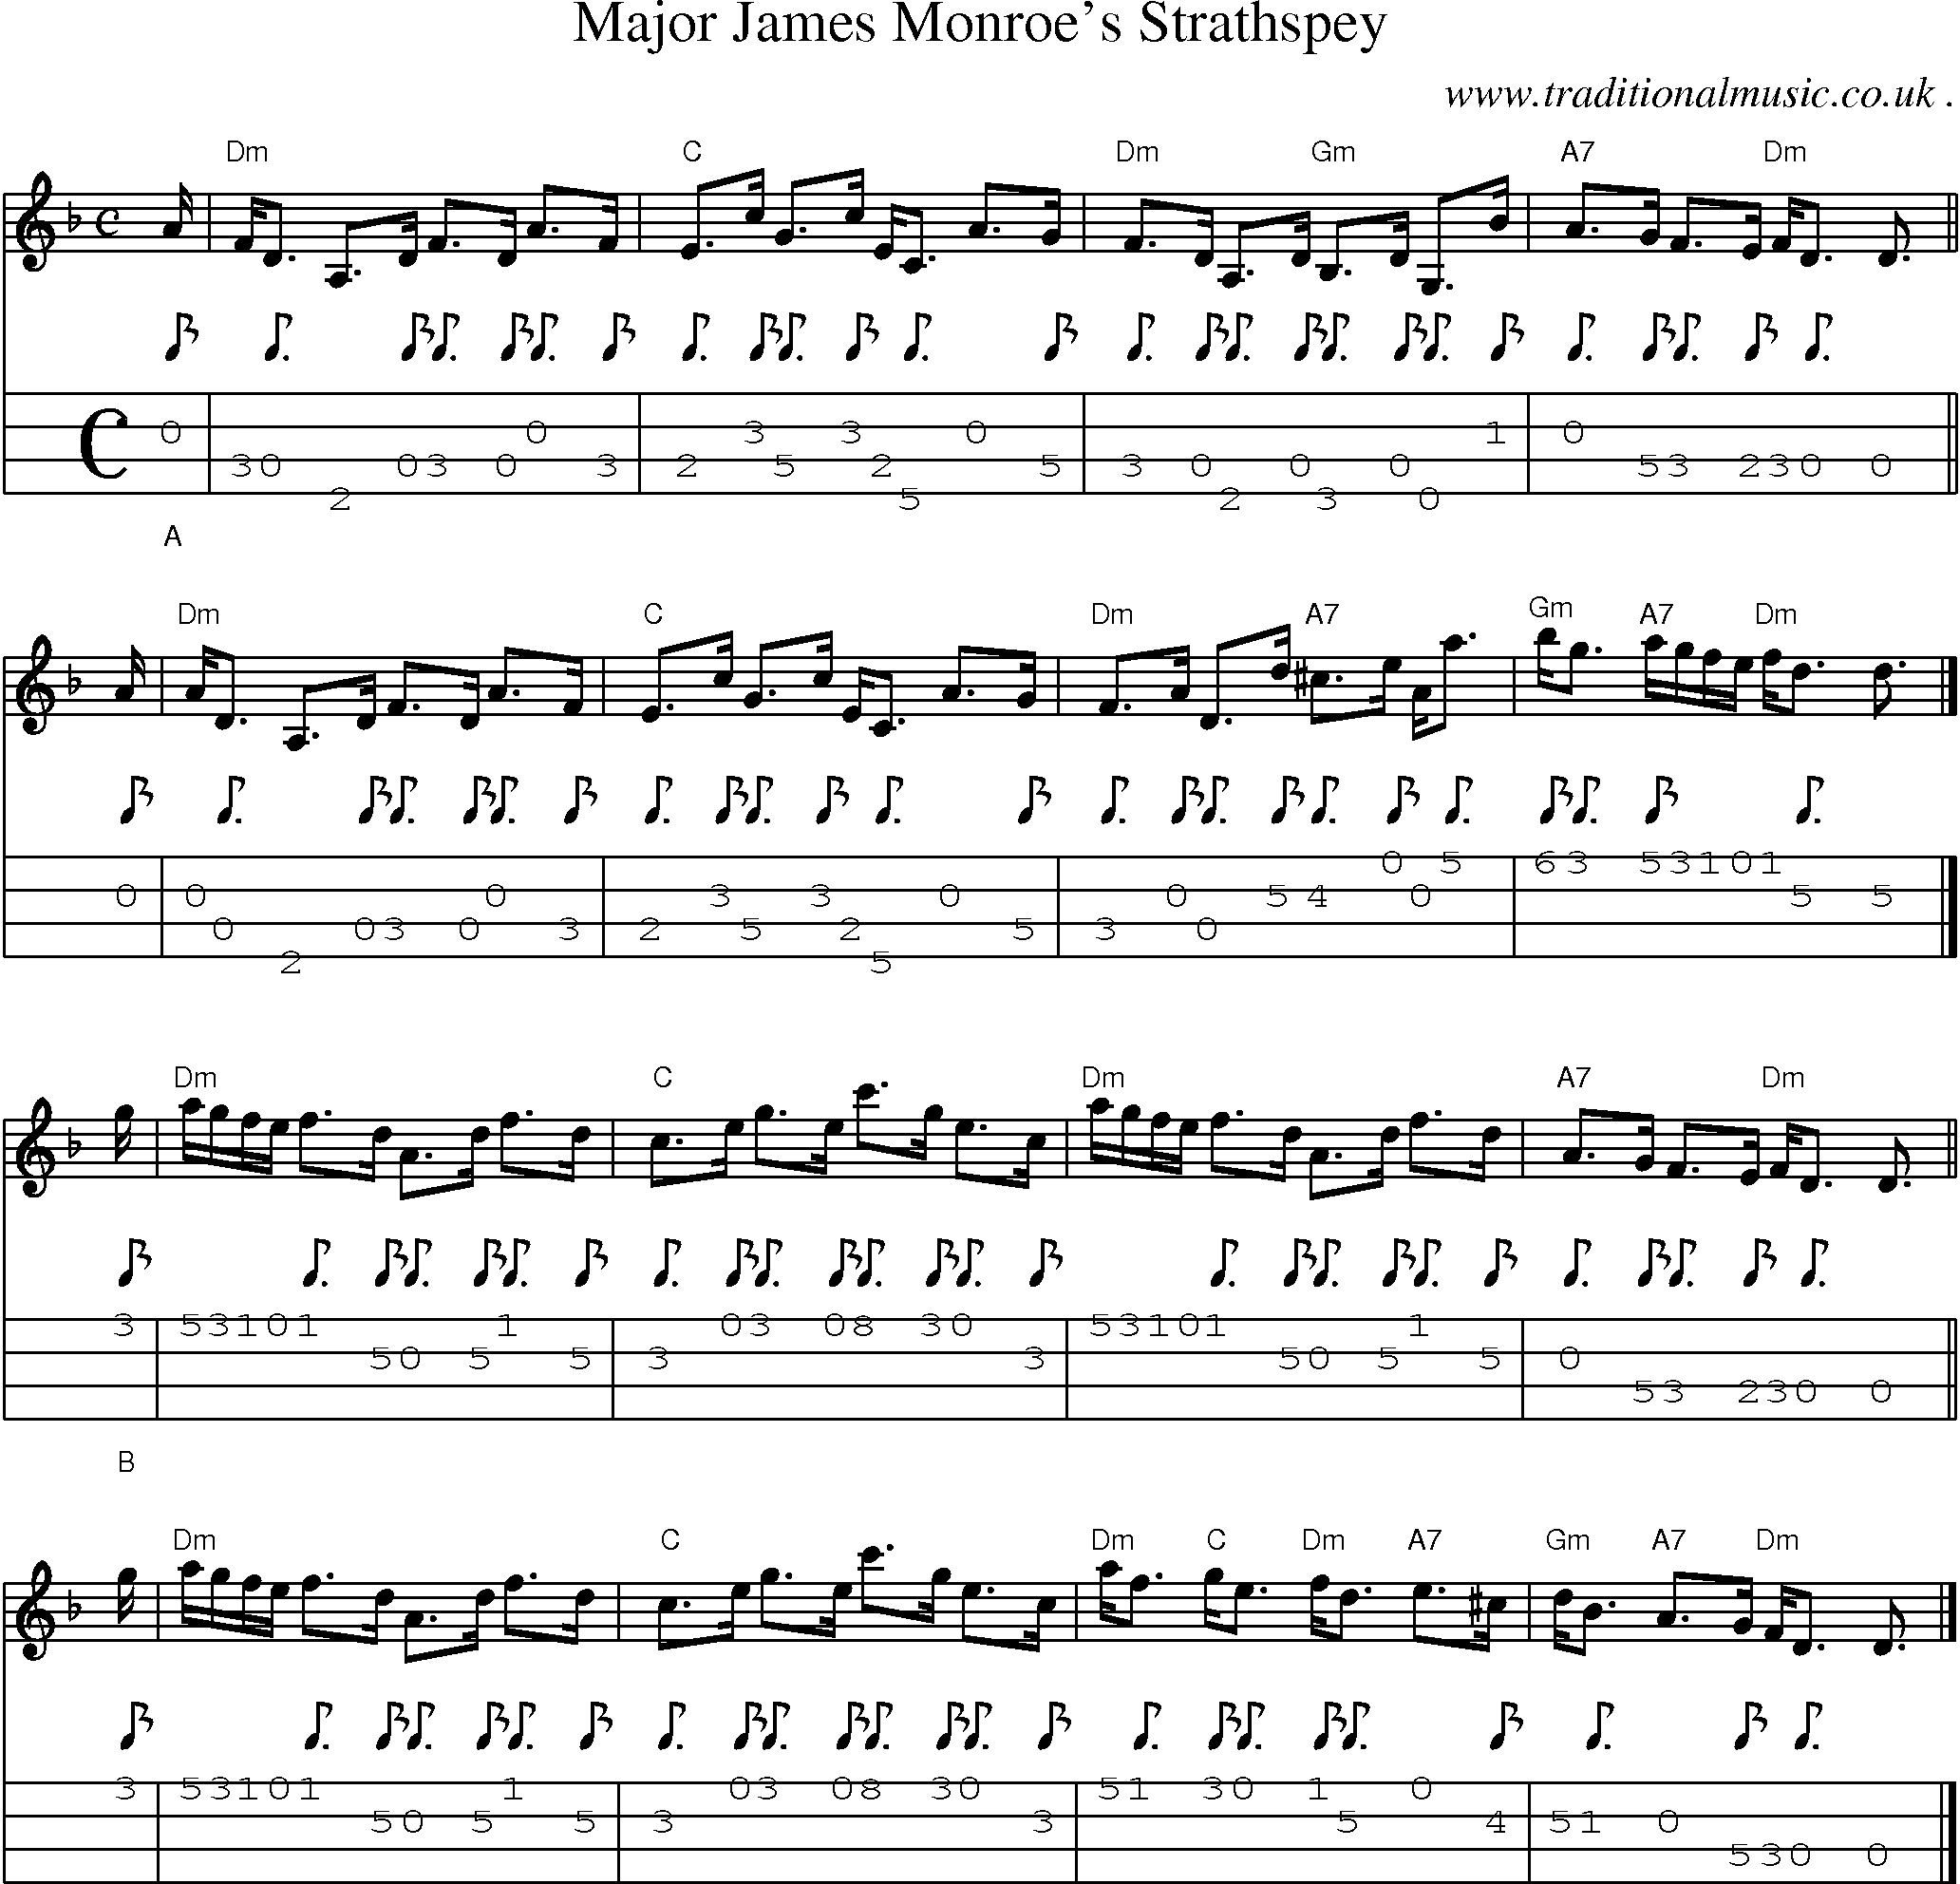 Sheet-music  score, Chords and Mandolin Tabs for Major James Monroes Strathspey